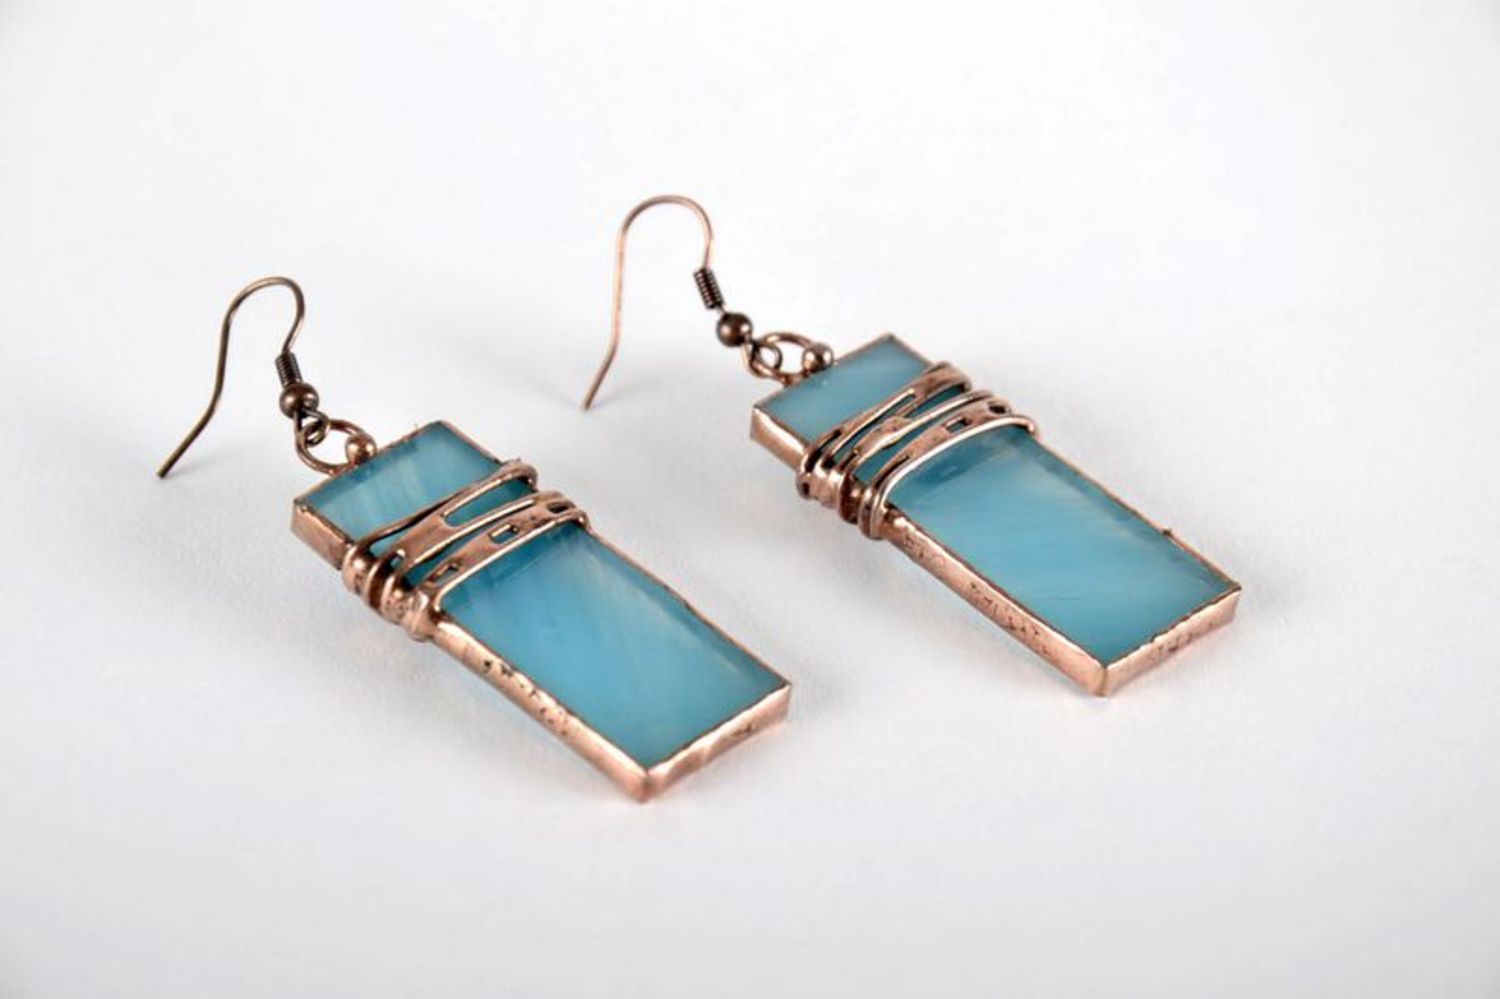 Stained glass long earrings made of copper and glass photo 2